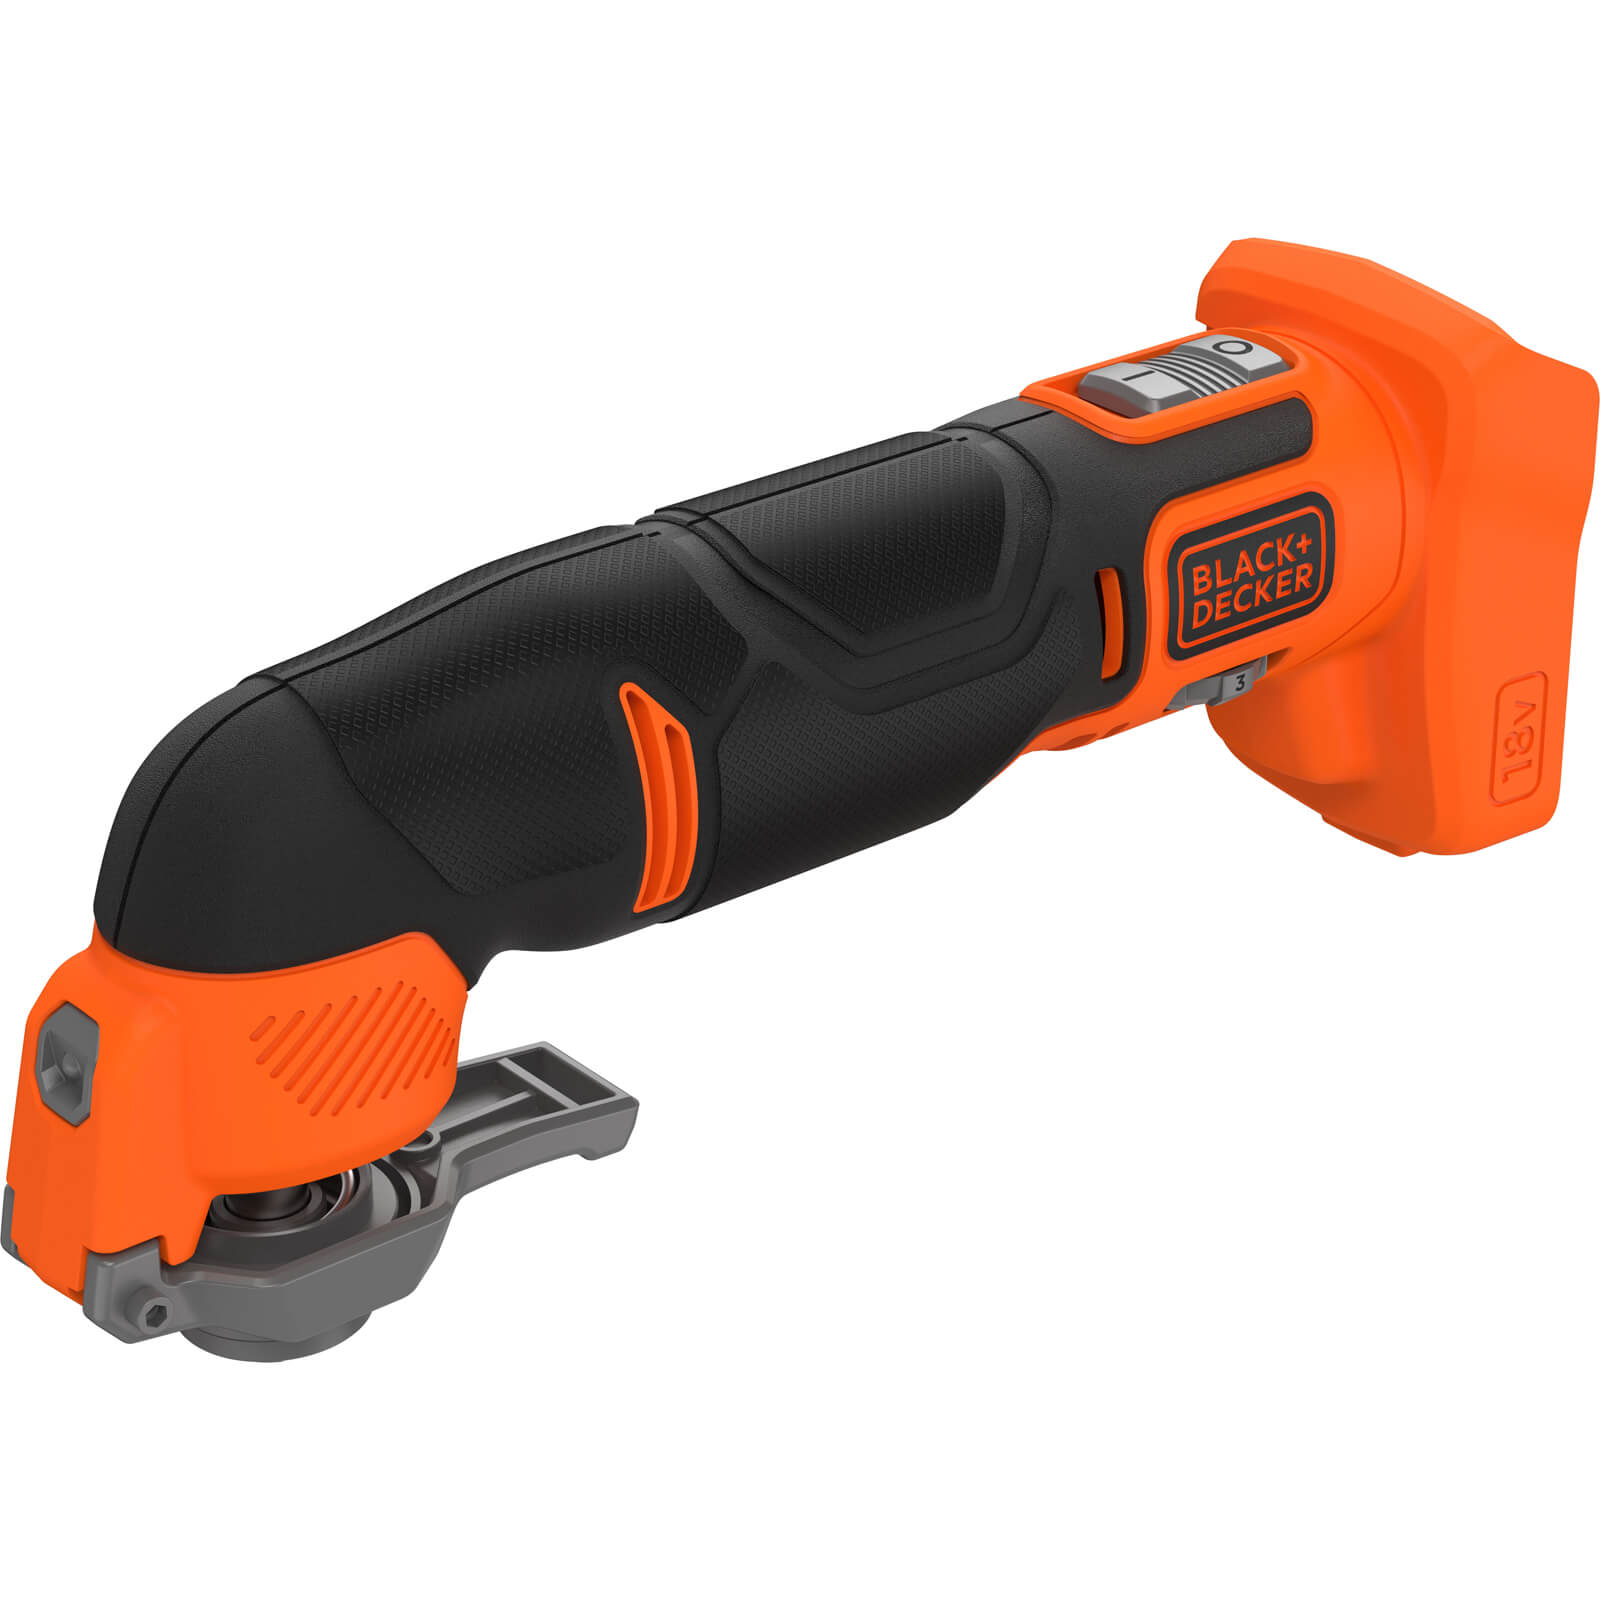 Image of Black and Decker BDCOS18 18v Cordless Oscillating Multi Tool No Batteries No Charger No Case with Accessories